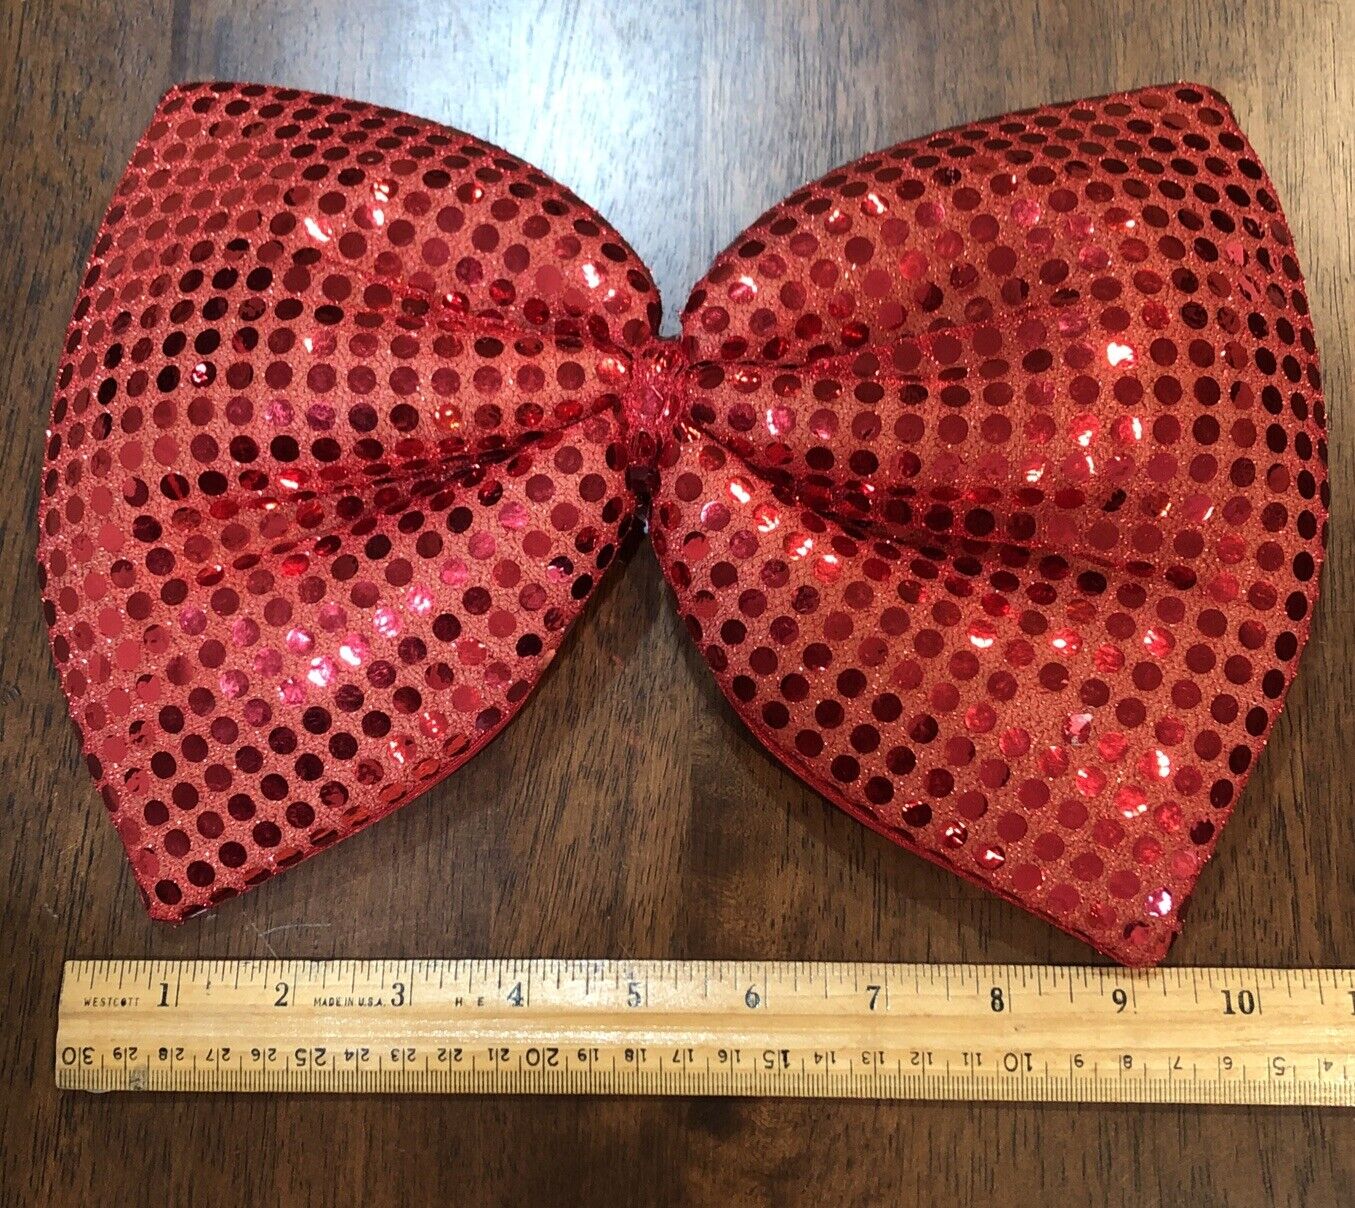 HUGE RED Bowtie Bow Tie Sequin Halloween Accessory Dress Up Theatrical Clown Rea